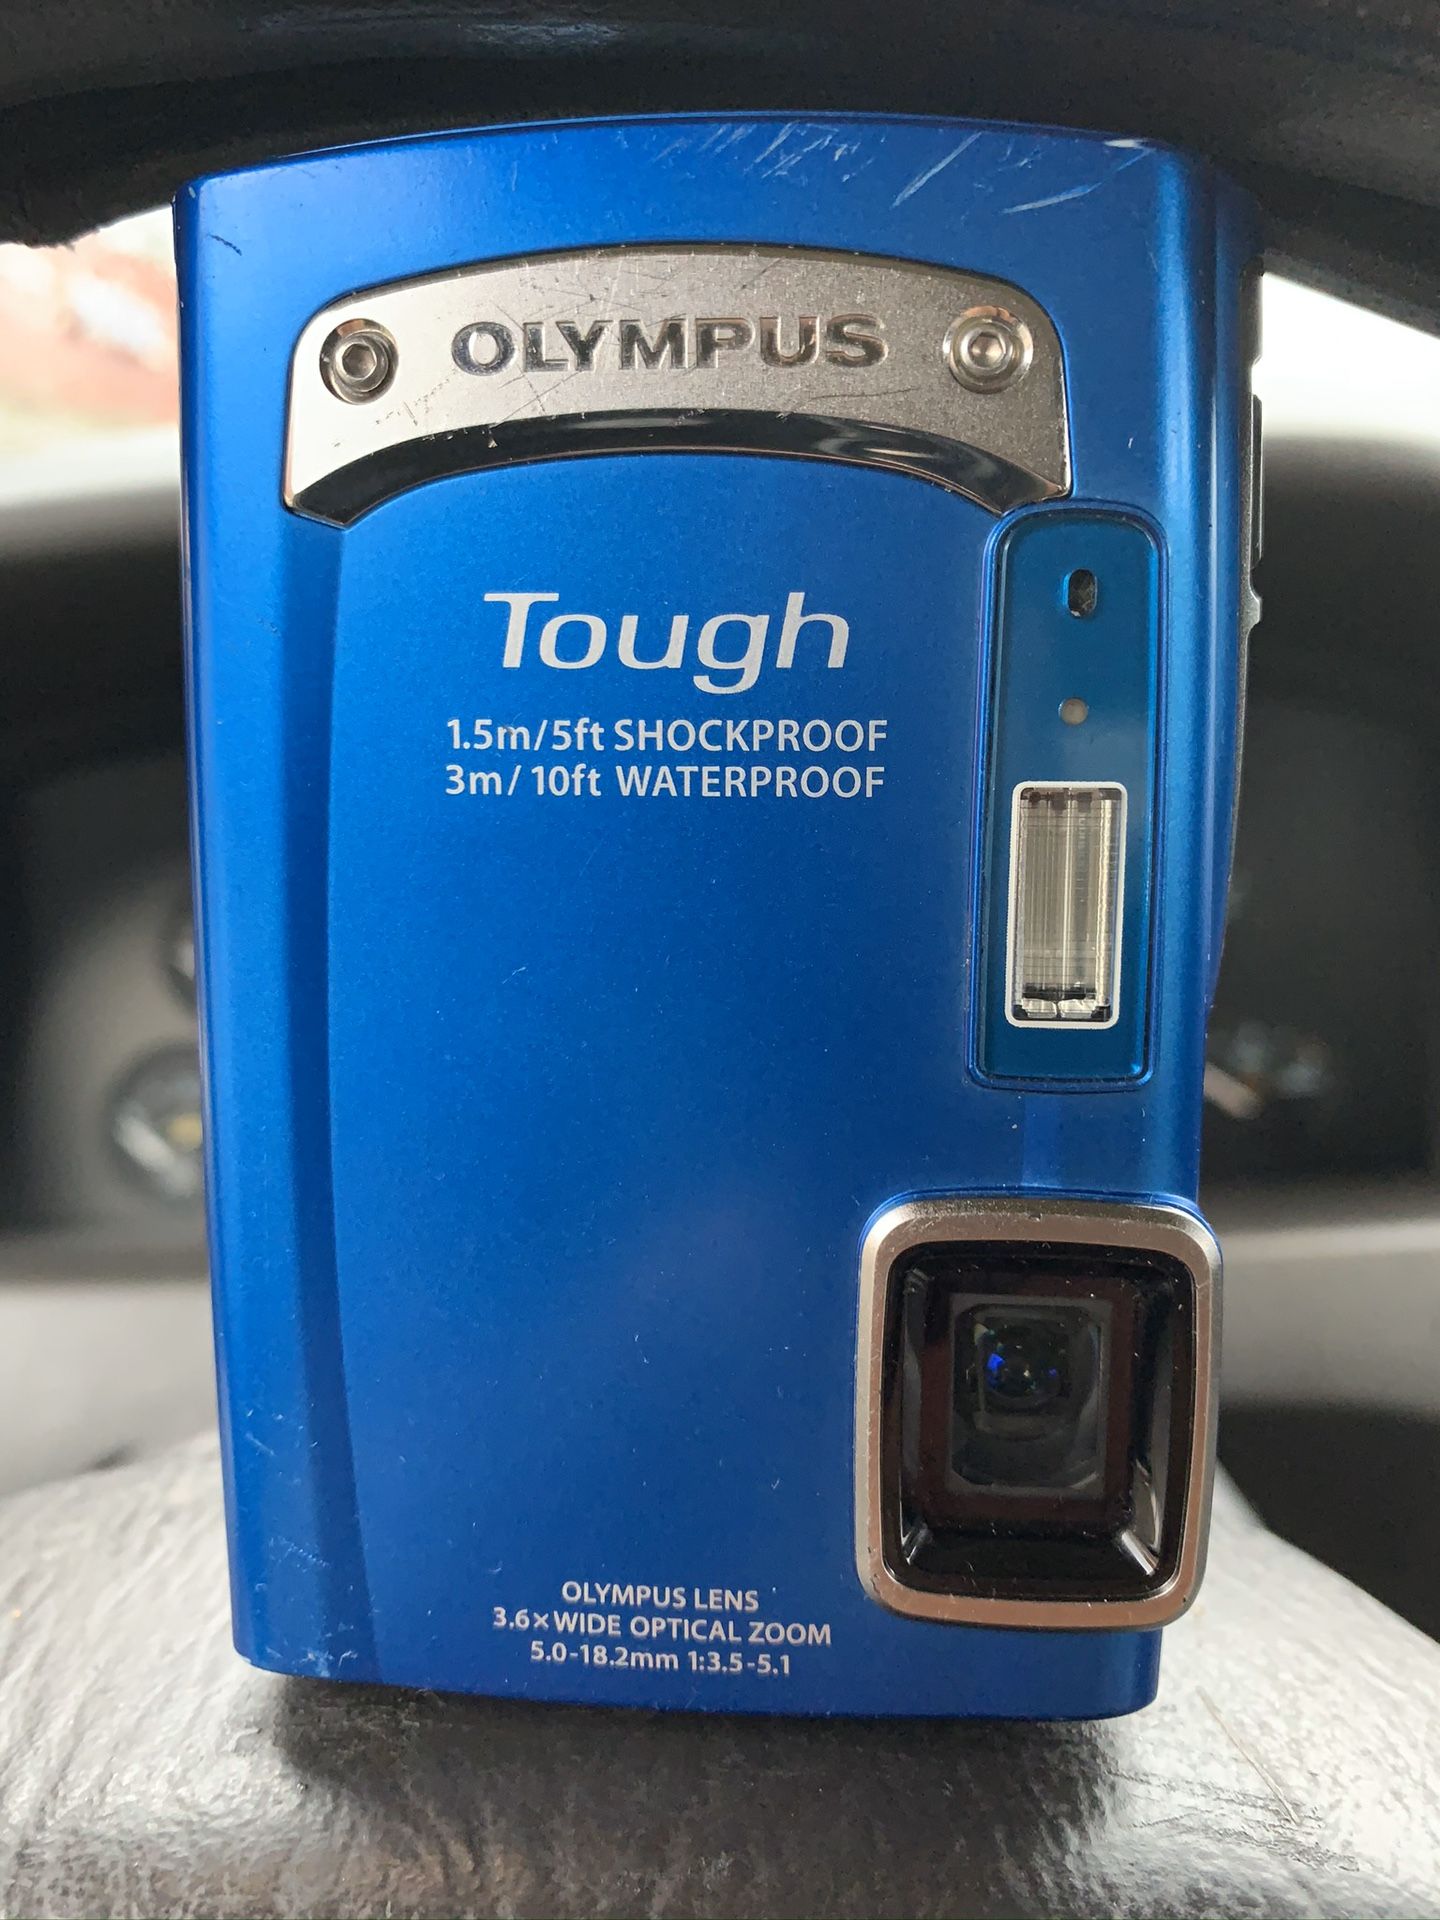 Olympus TG-310 Tough 14.0 MP Digital Camera with 3.6x Wide Optical Zoom and 2.7-Inch LCD